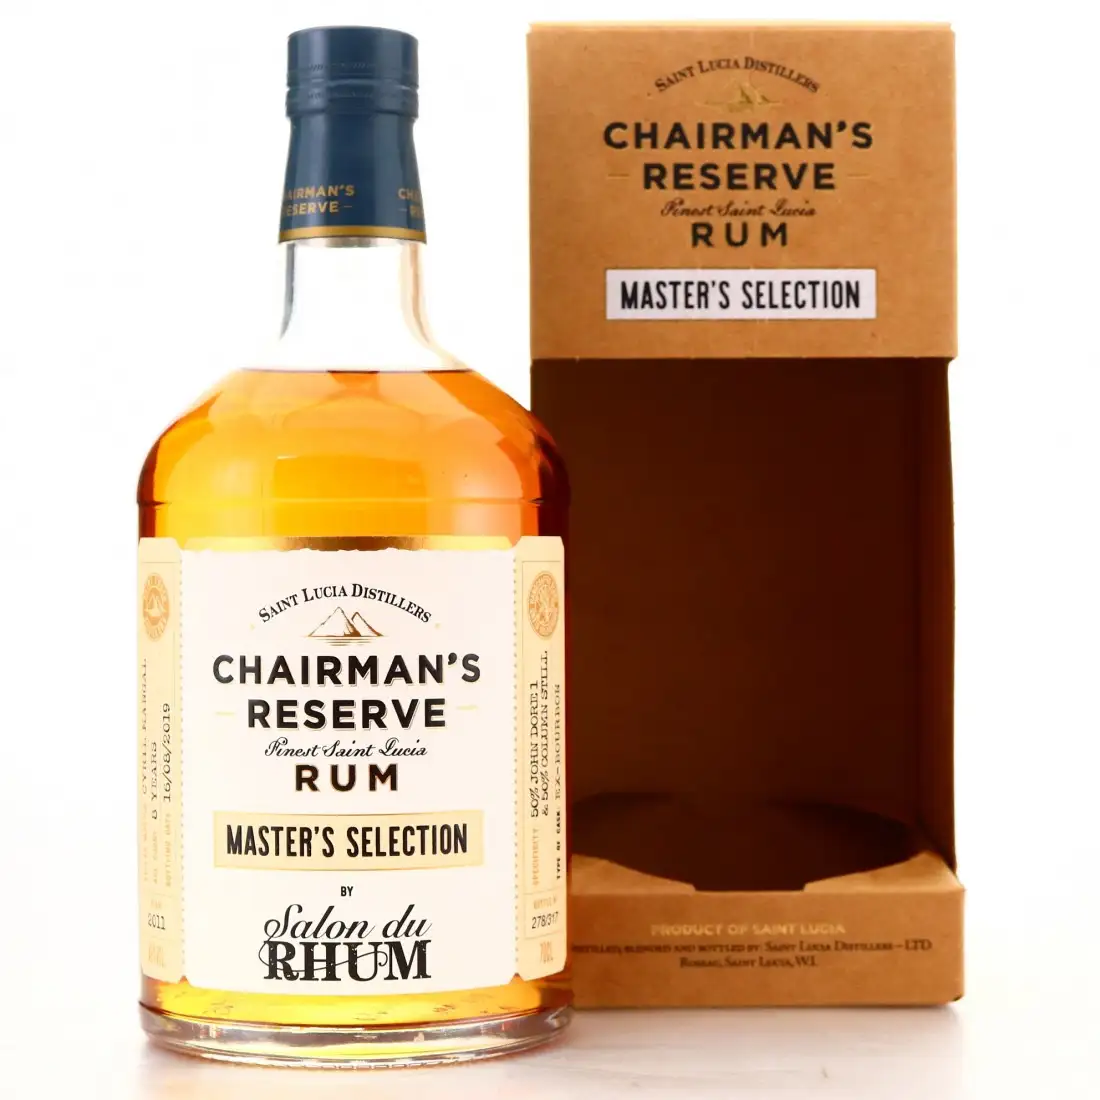 Image of the front of the bottle of the rum Chairman‘s Reserve Master’s Selection (Salon du Rhum)